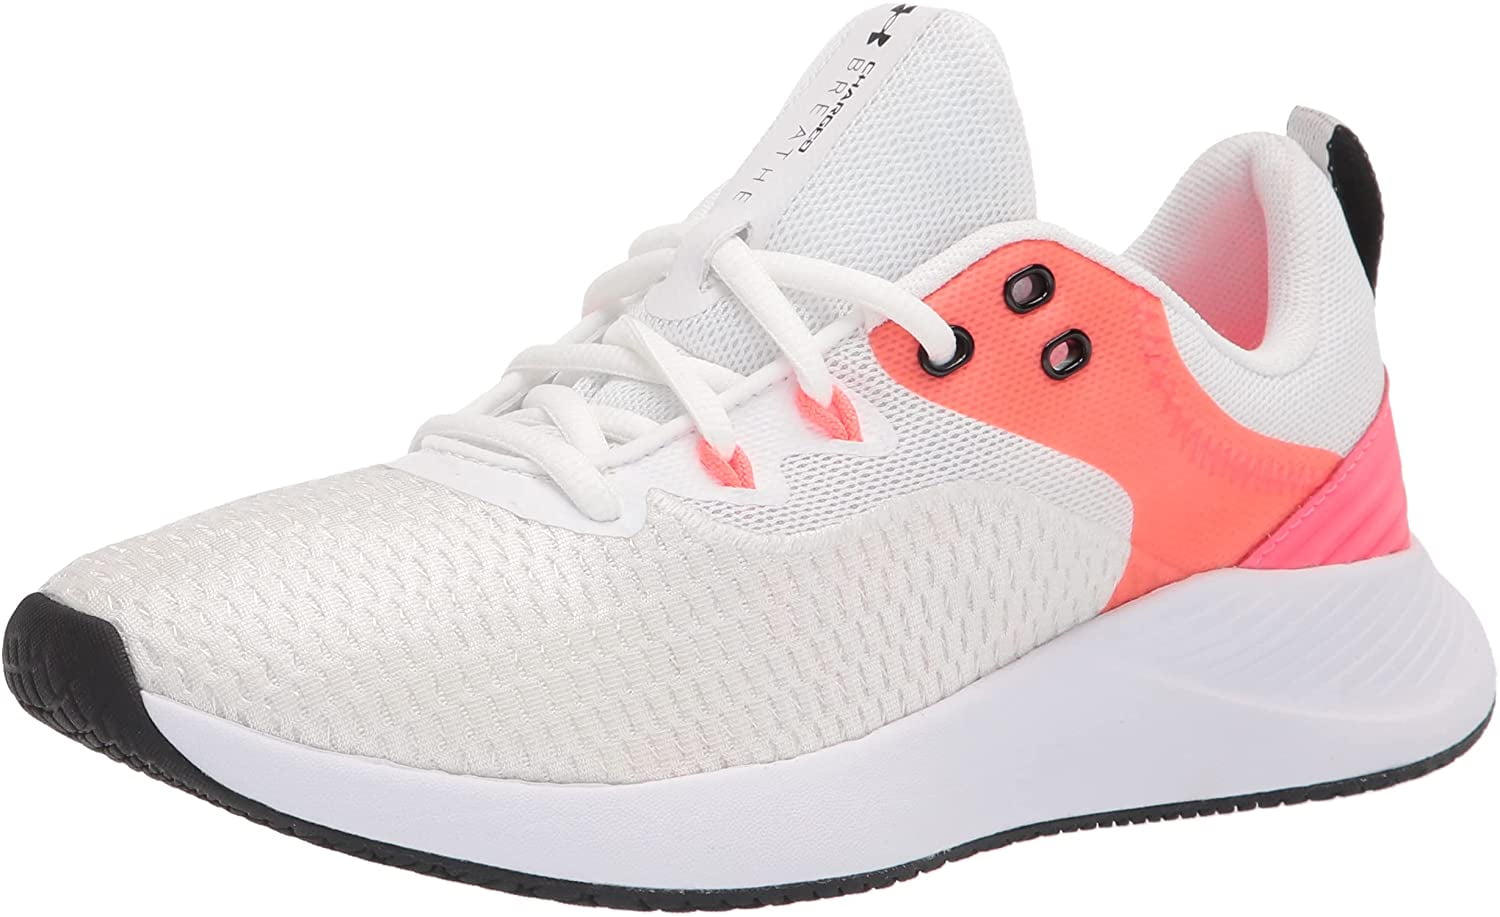 Under Armour Womens Charged Breathe Tr 3 Cross Trainer 